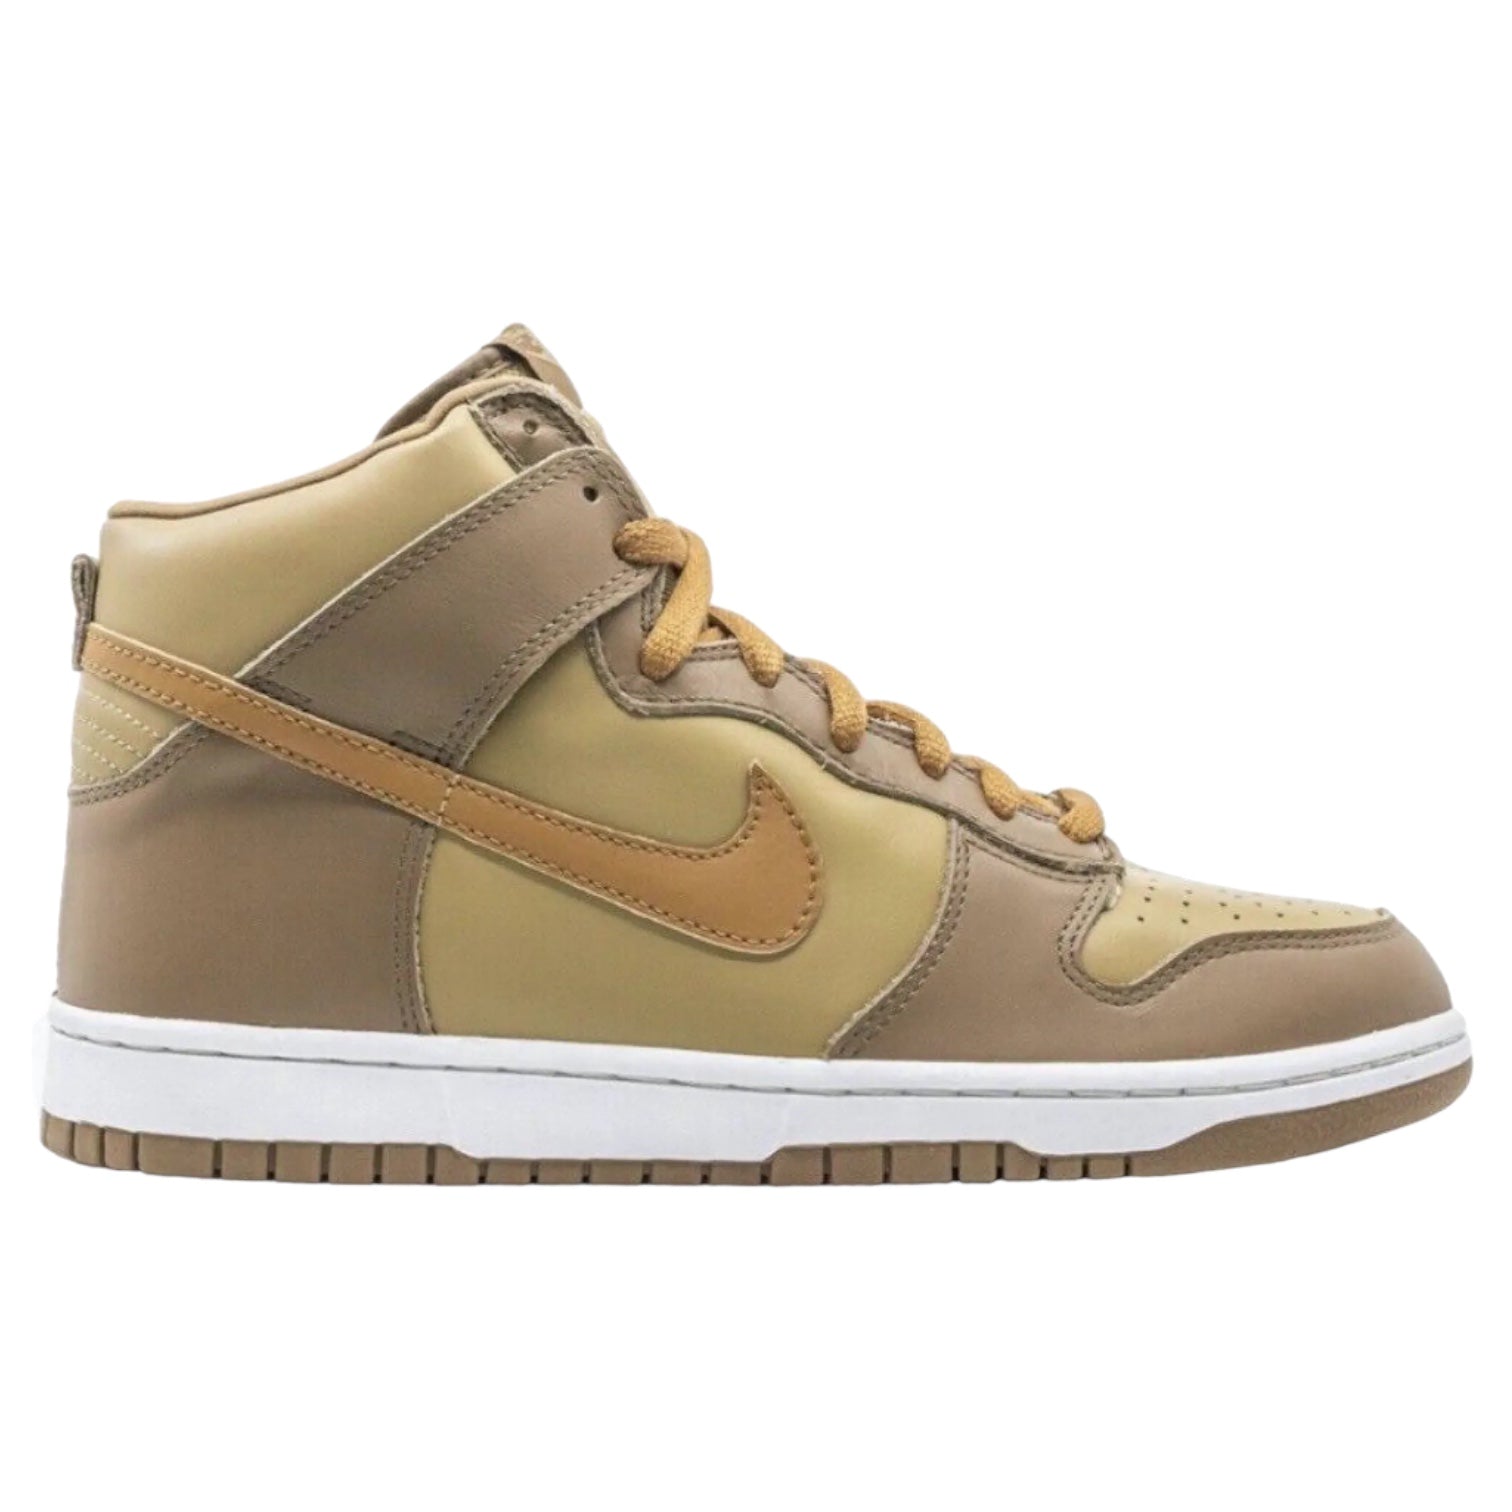 Nike Dunk High Hay Maple Taupe 2003